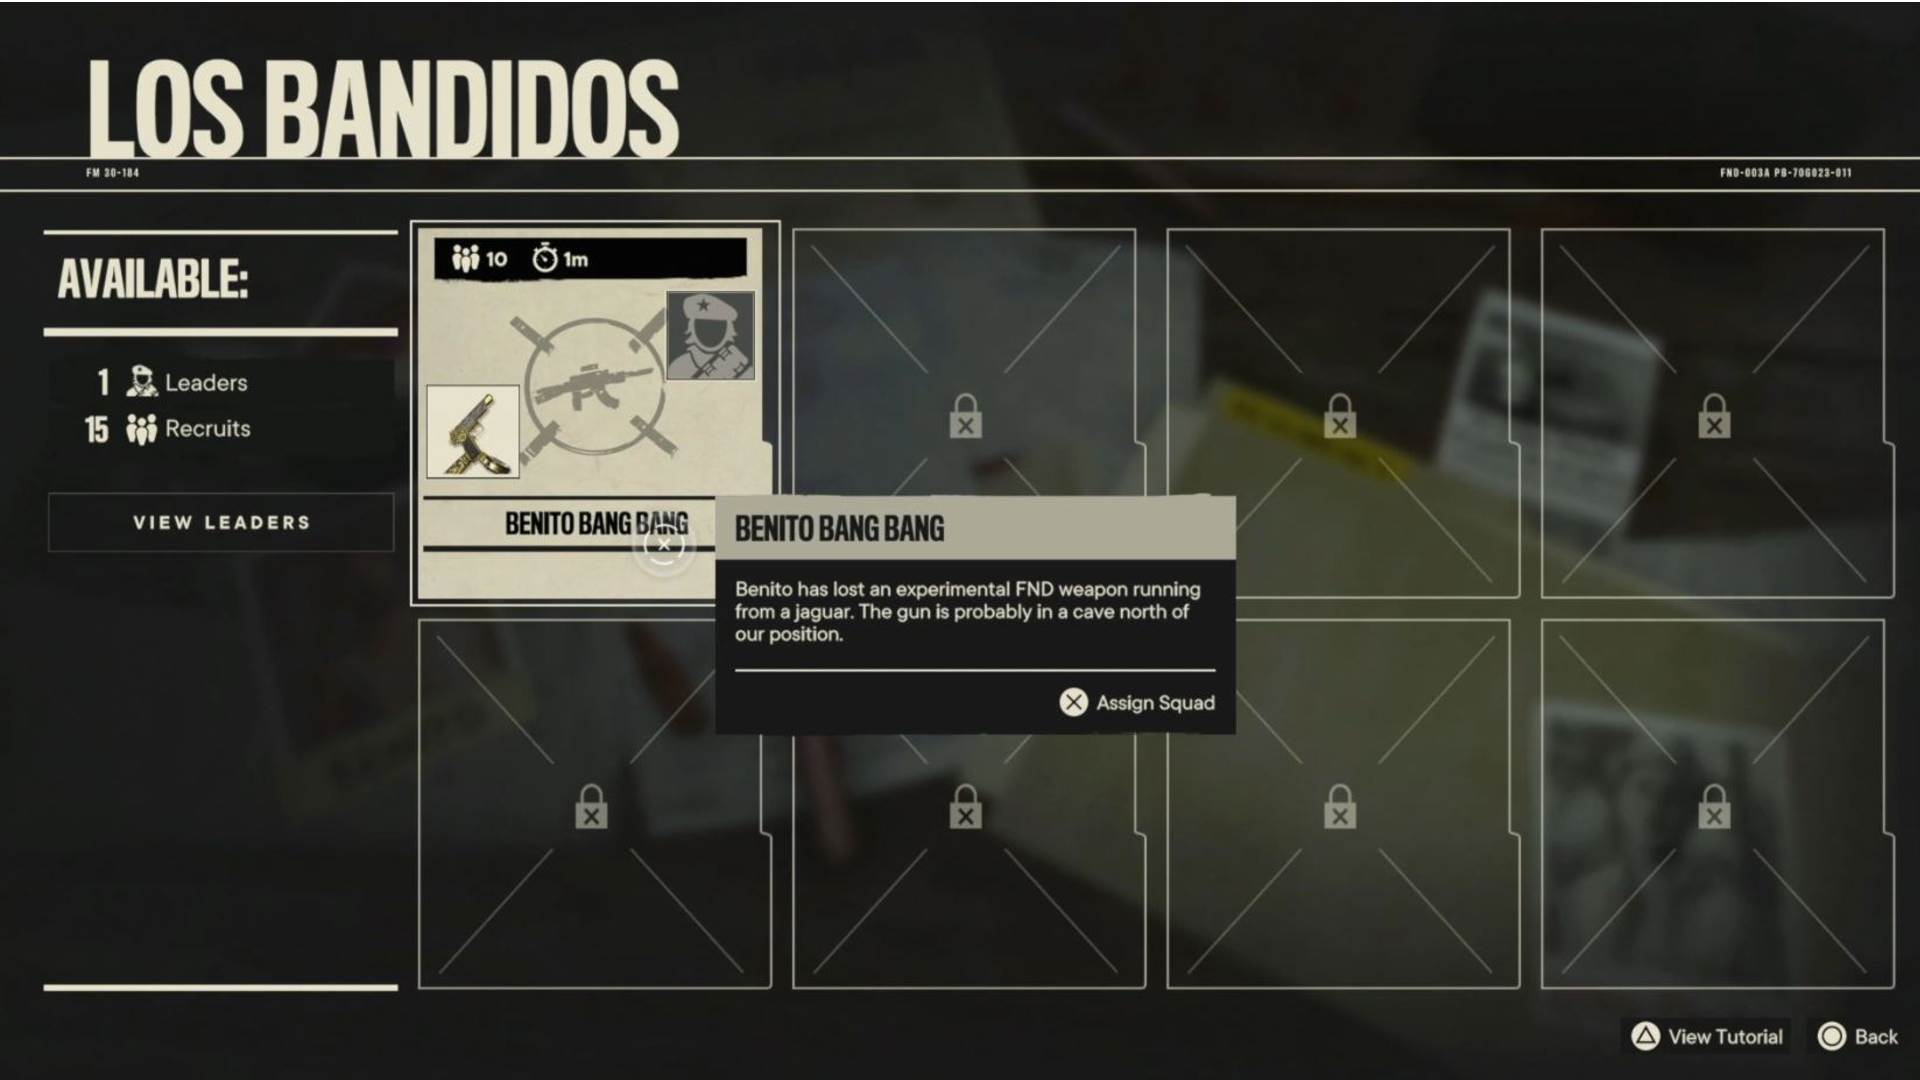 Far Cry 6 Bandidos Operations: The menu can be seen which showcases the Bandido Operations available. 